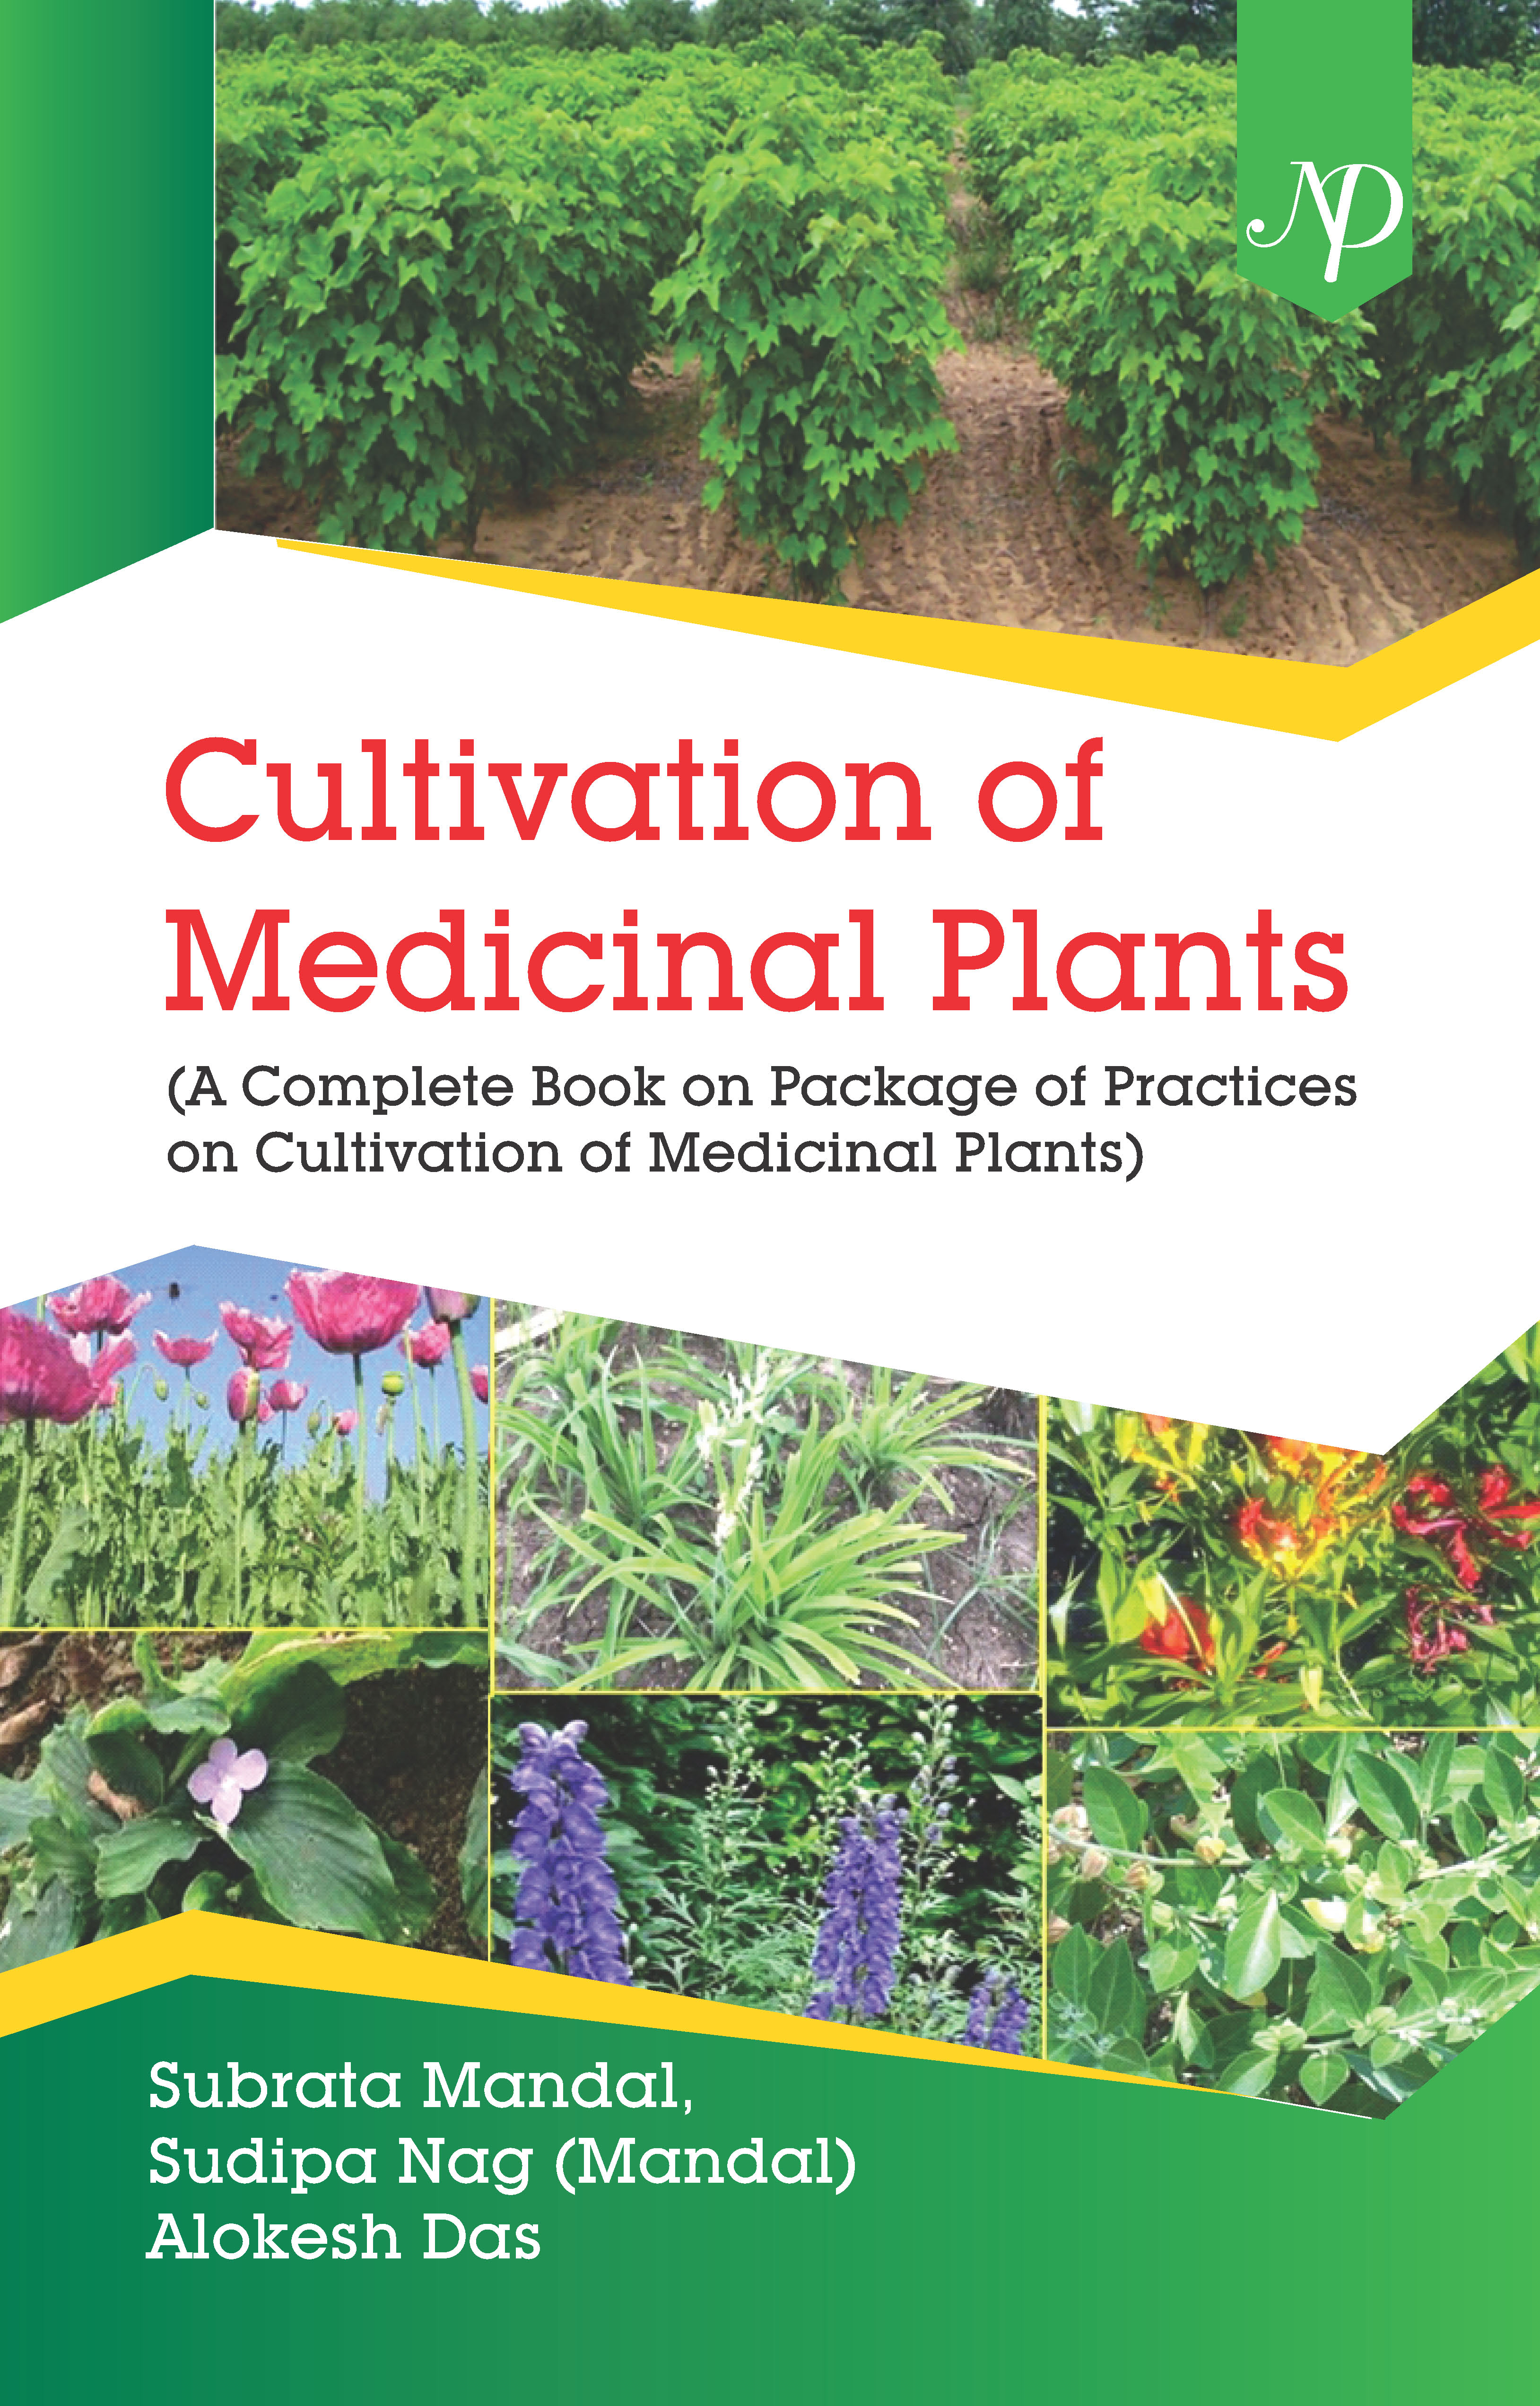 Cultivation of Medicinal Plants: (A Complete Book on Package of Practices on Cultivation of Medicinal Plants)